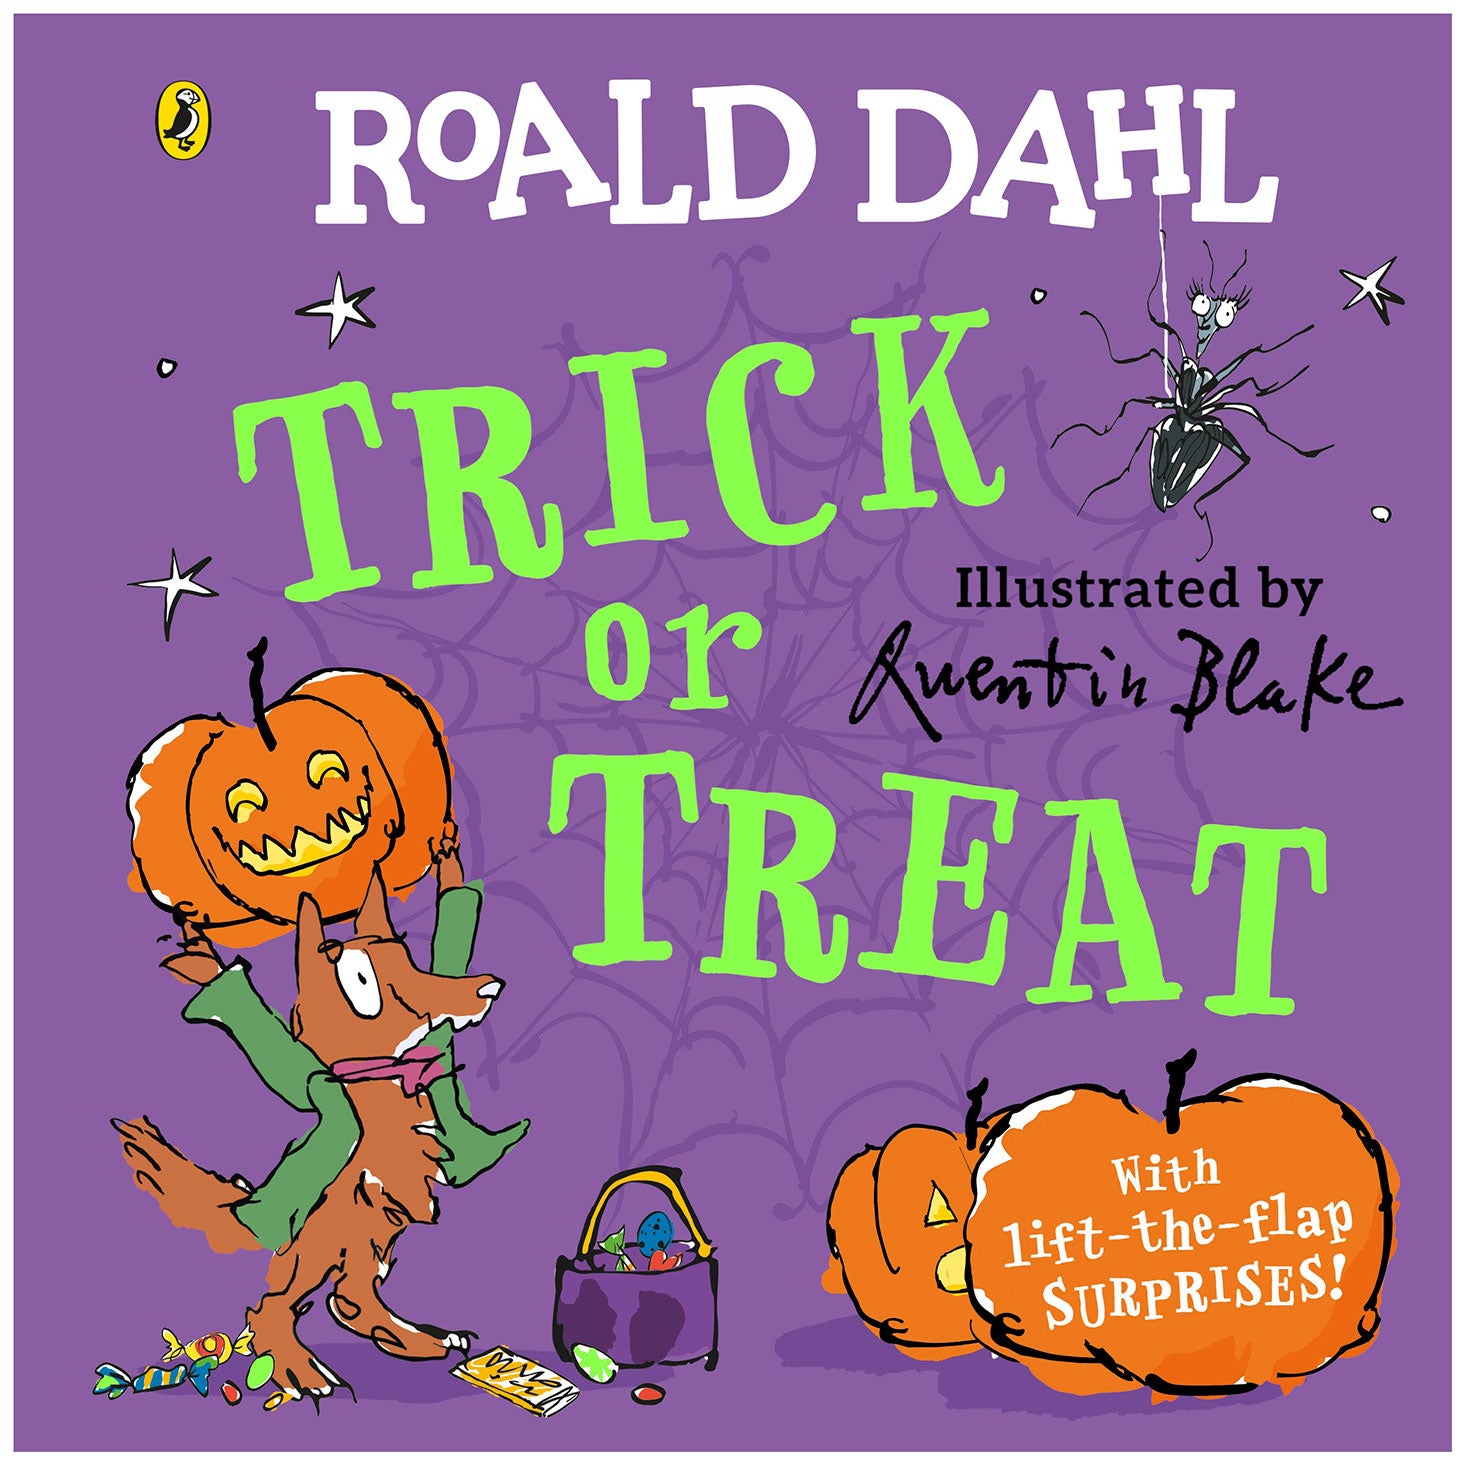 Trick or Treat, a lift the flap board book based on Roald Dahl stories with Quentin Blake illustrations